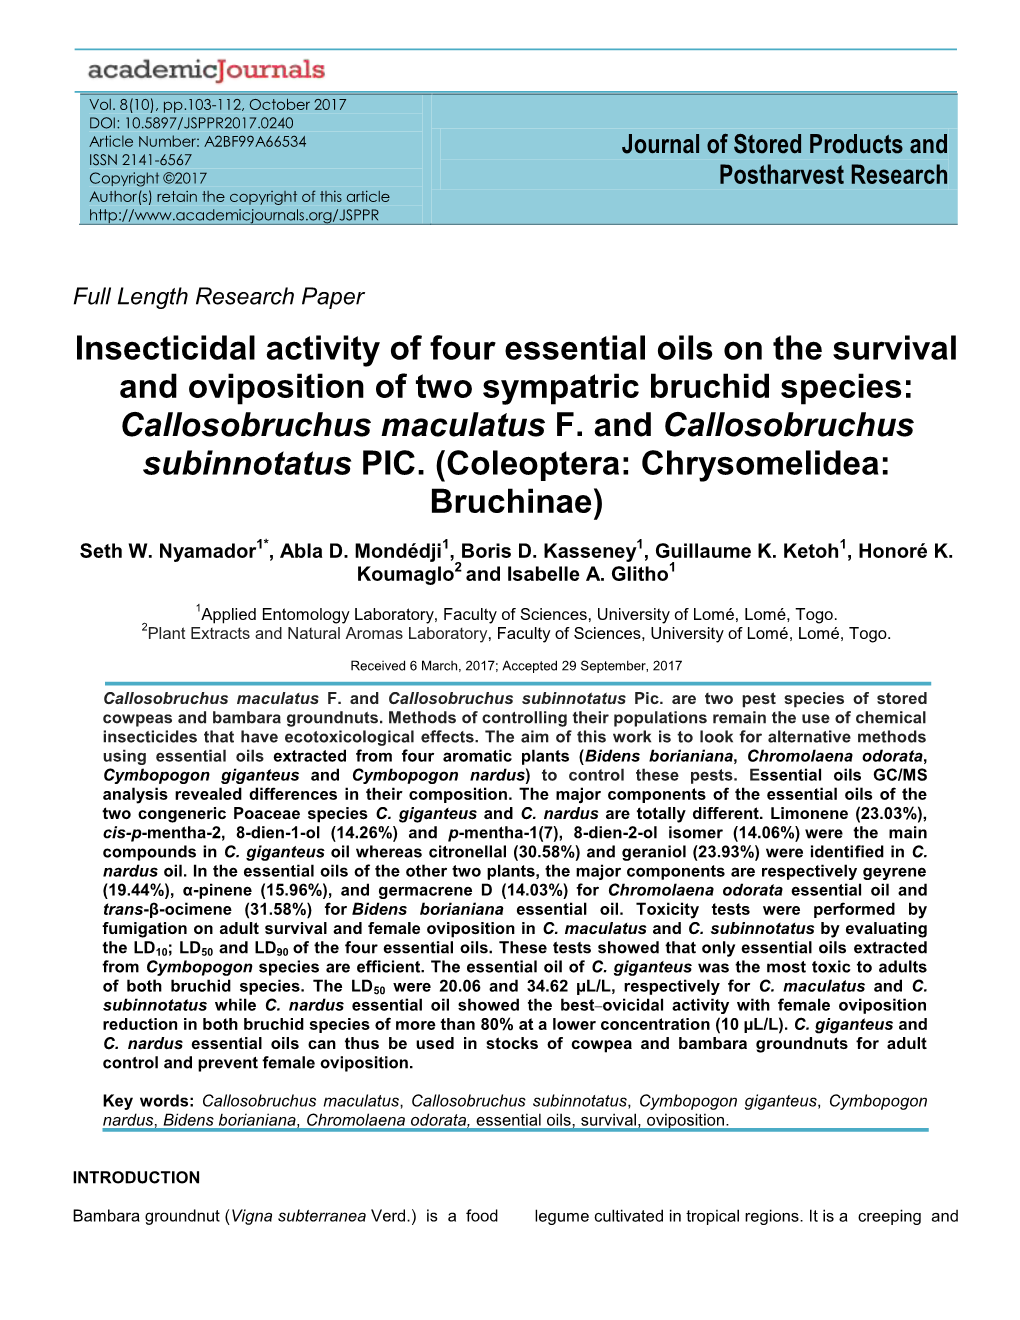 Insecticidal Activity of Four Essential Oils on the Survival and Oviposition of Two Sympatric Bruchid Species: Callosobruchus Maculatus F